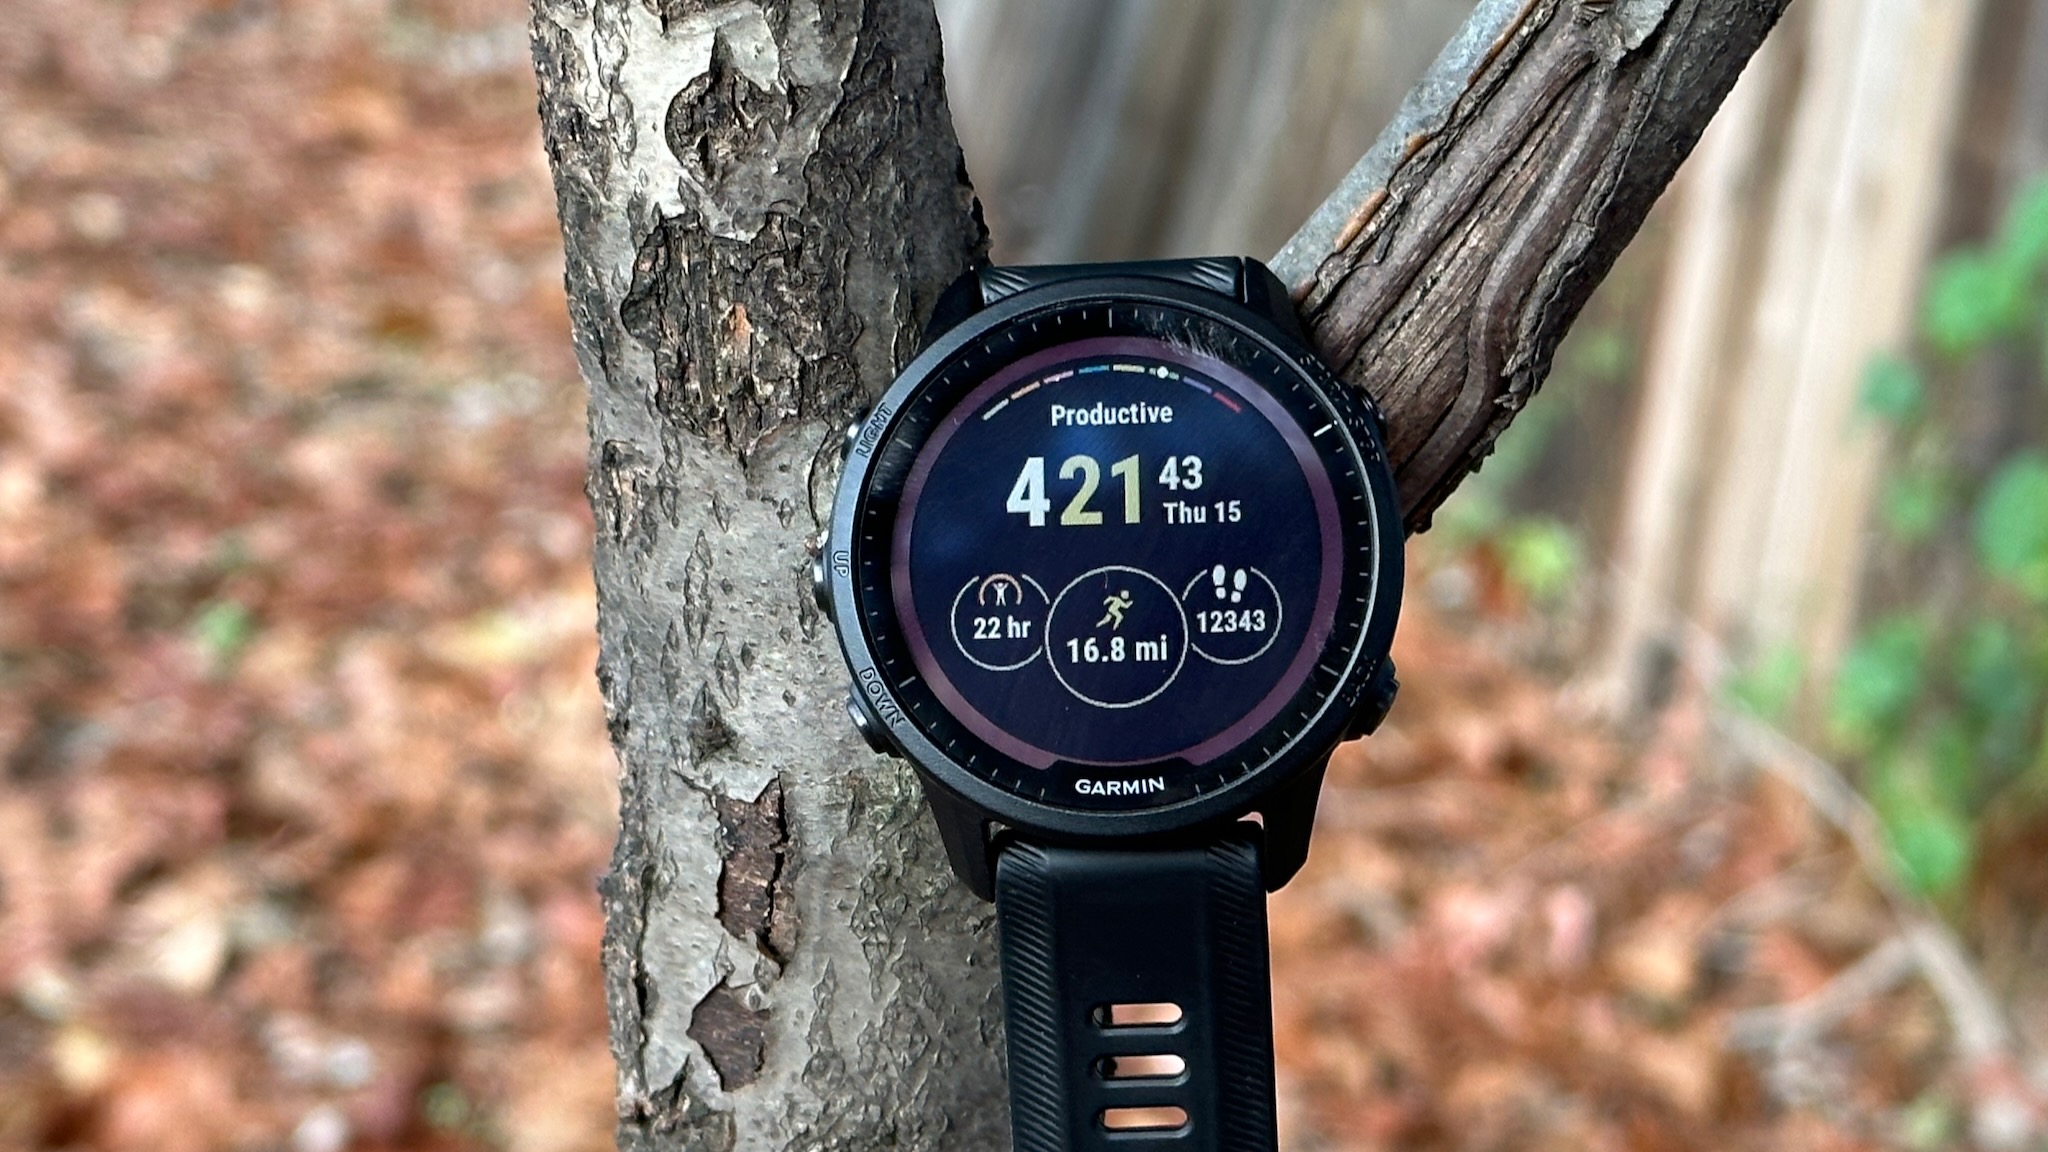 Garmin Forerunner 955 Solar watch face showing mileage, daily steps, and recovery time.